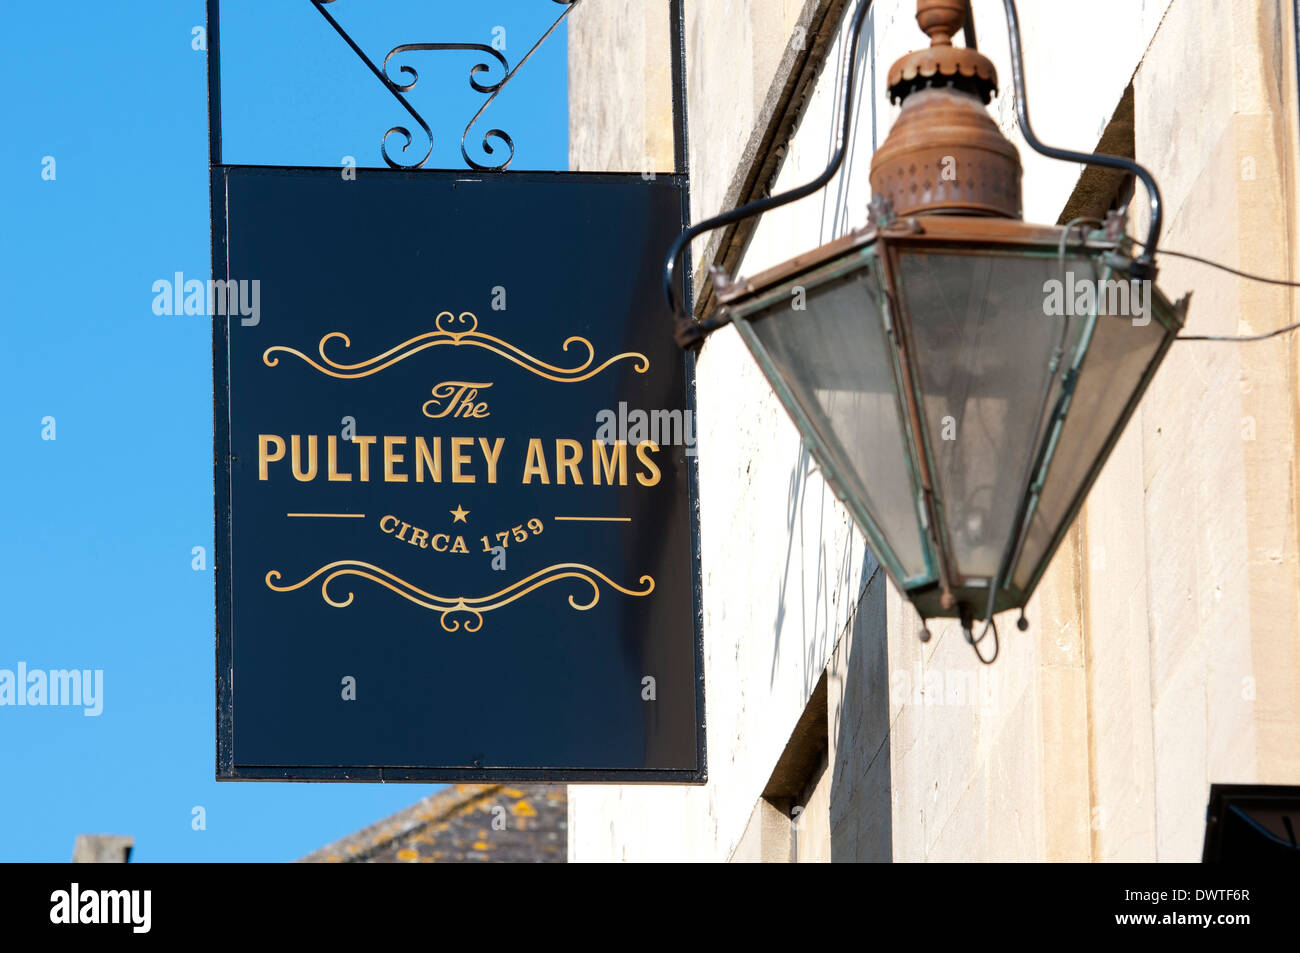 The Pulteney Arms pub sign, Bath, Somerset, England, UK Stock Photo